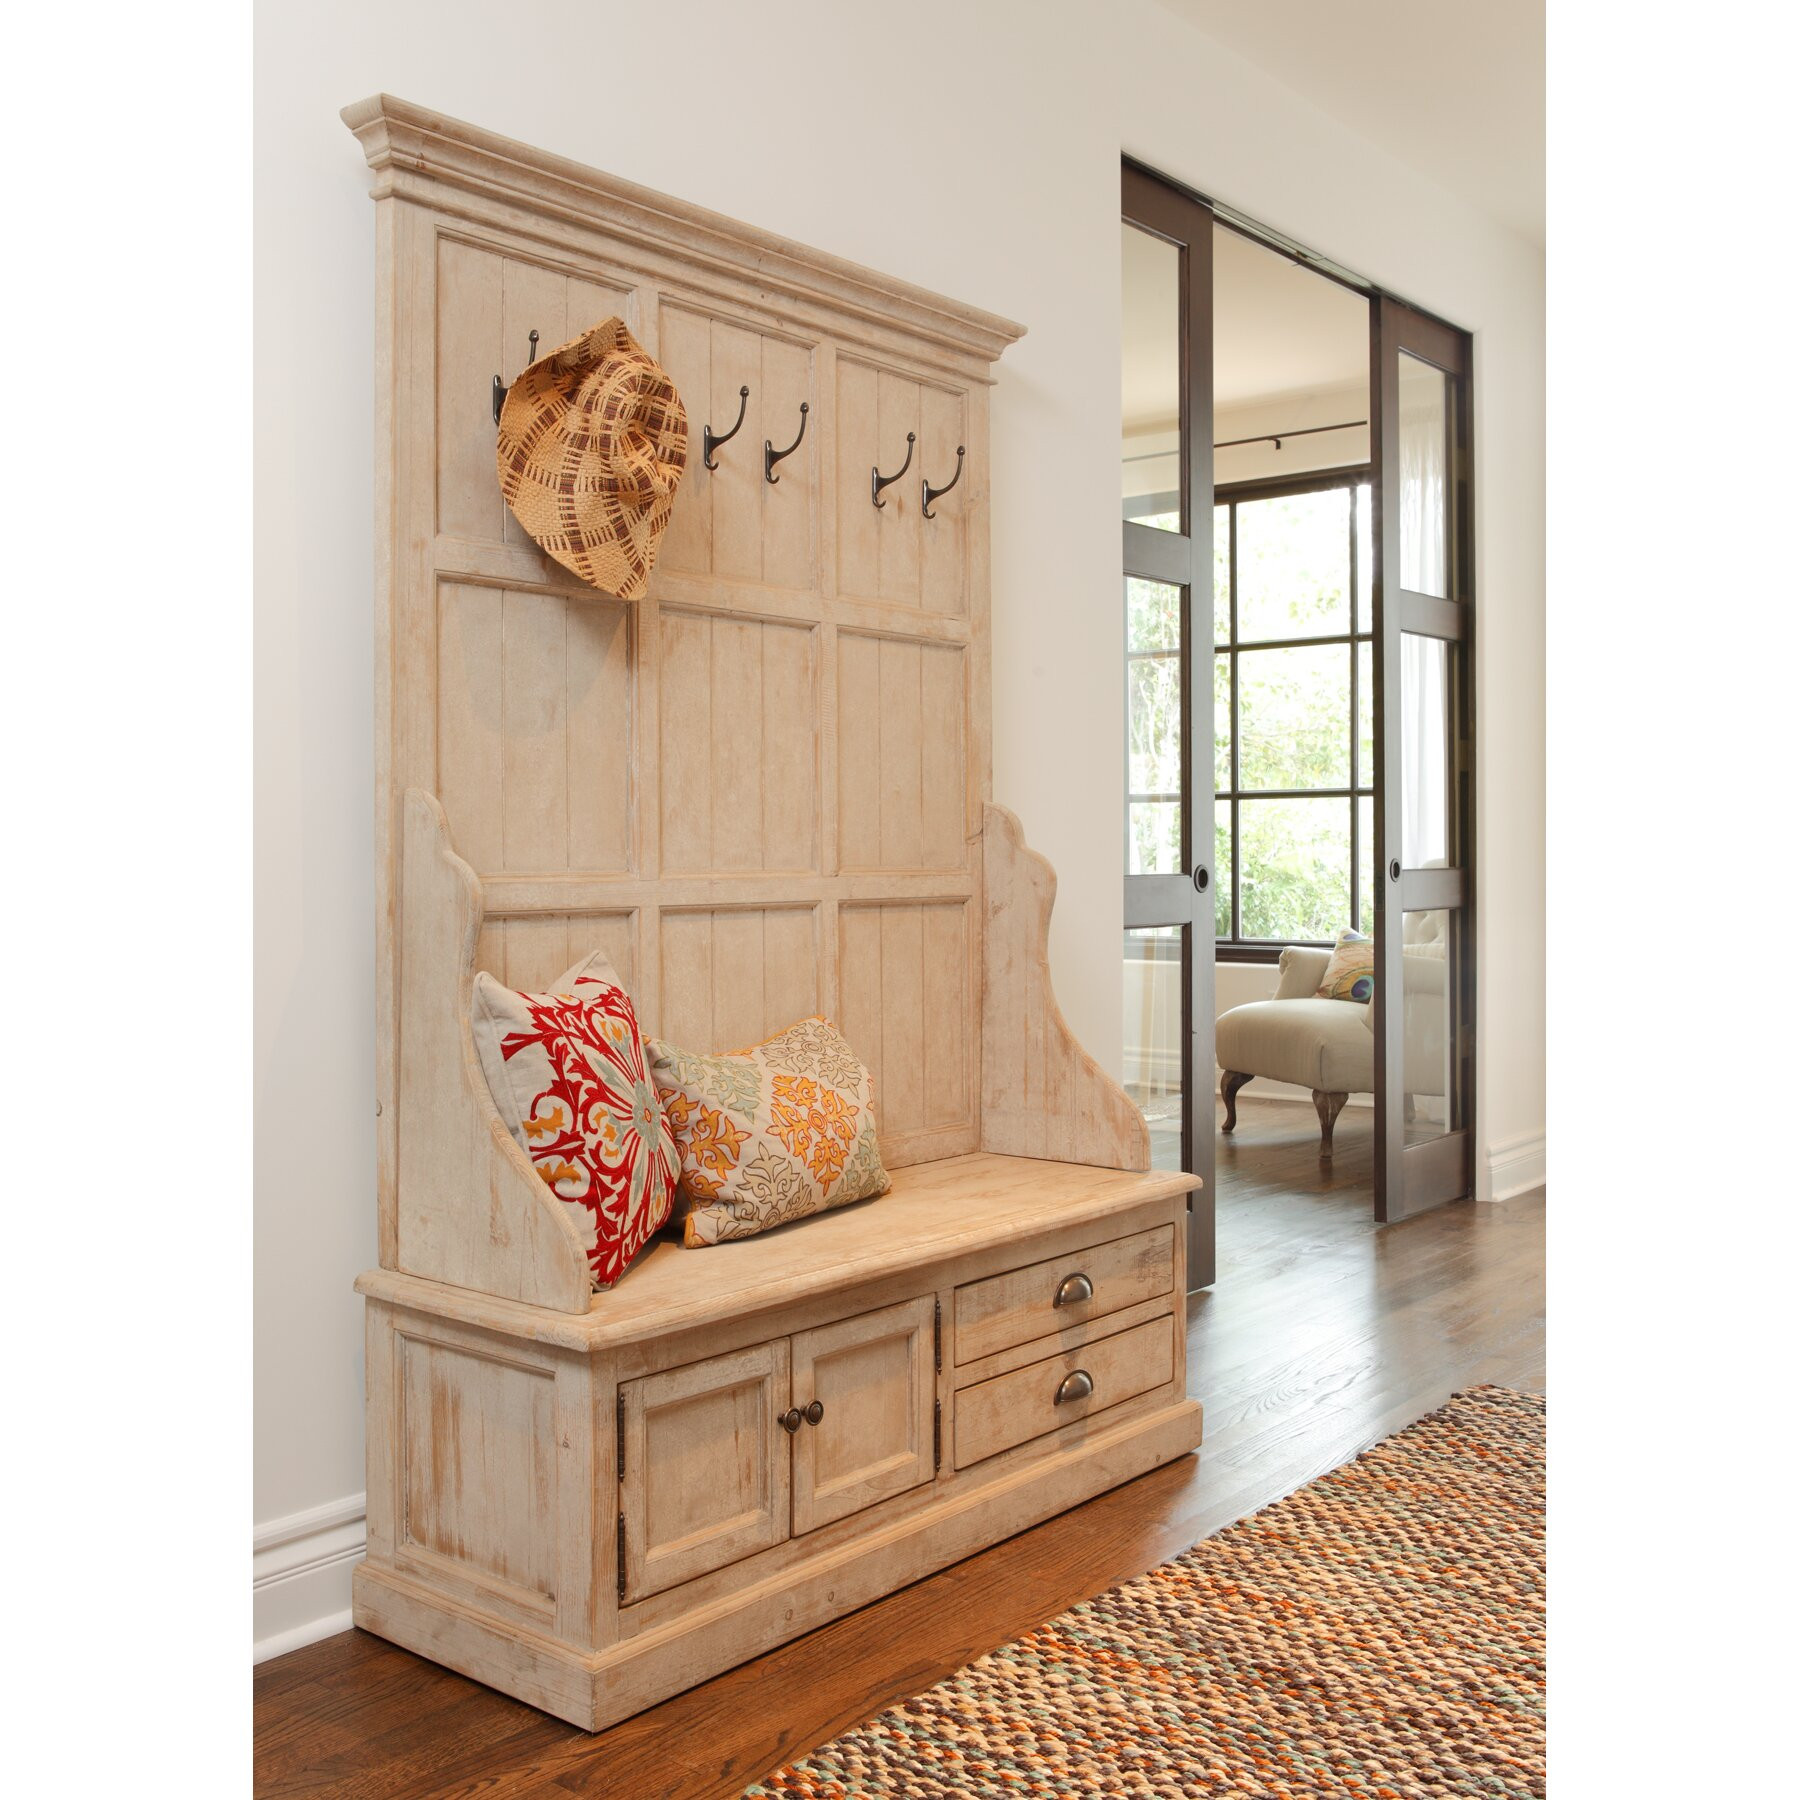 Entry Bench With Storage
 Kosas Home Elo Pine Storage Entryway Bench & Reviews